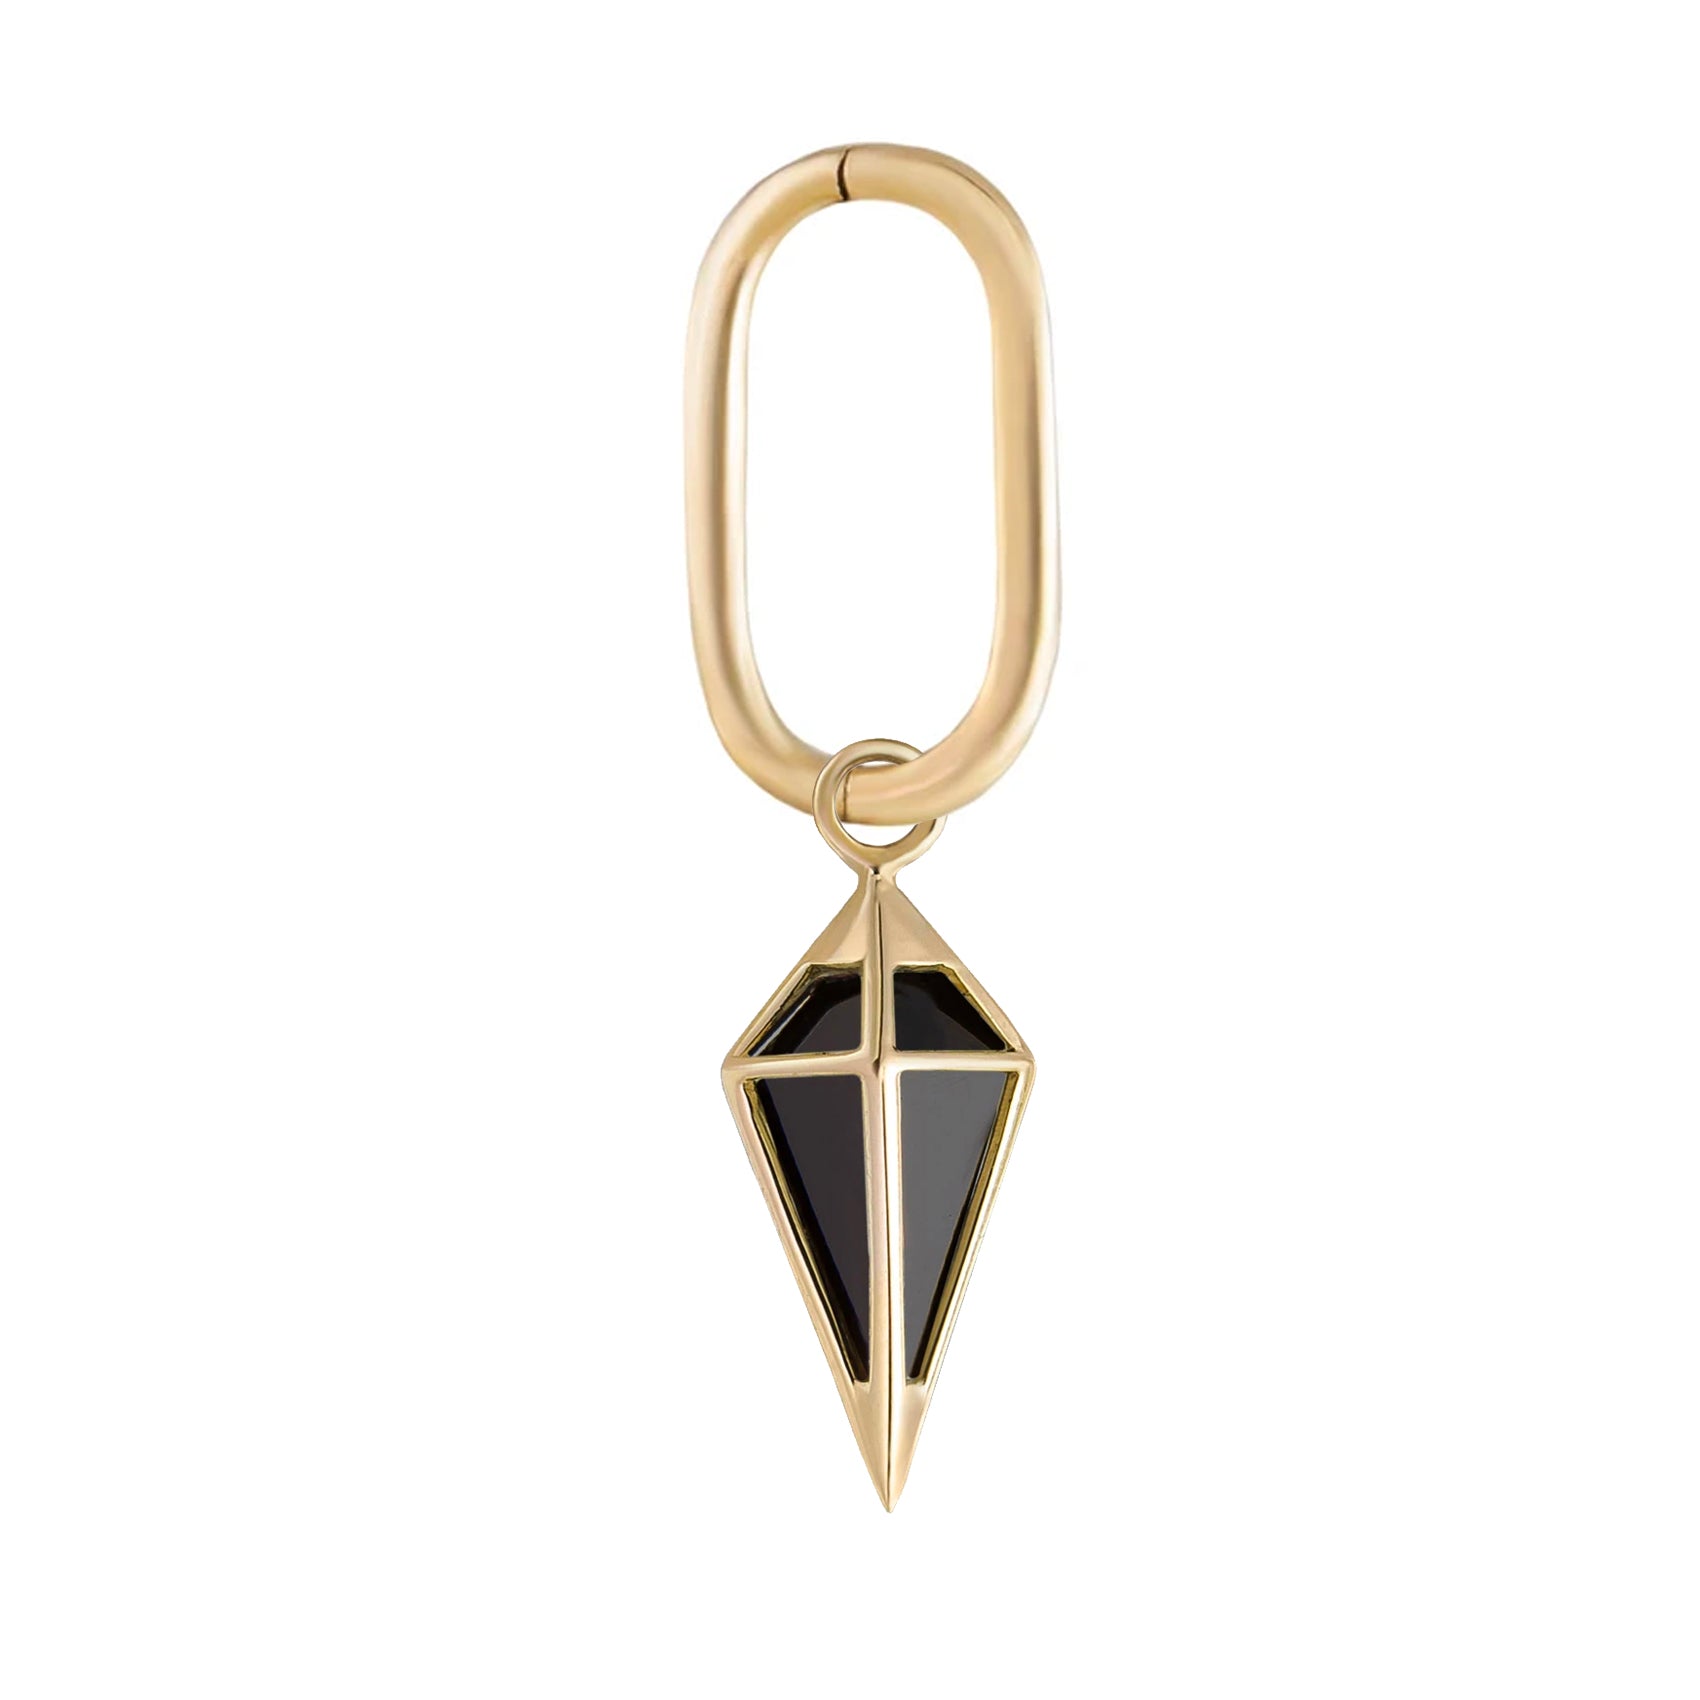 Metier by tomfoolery Midi Seamless Oval Clicker Hoop with Black Spinel Short Pendulum Plaque